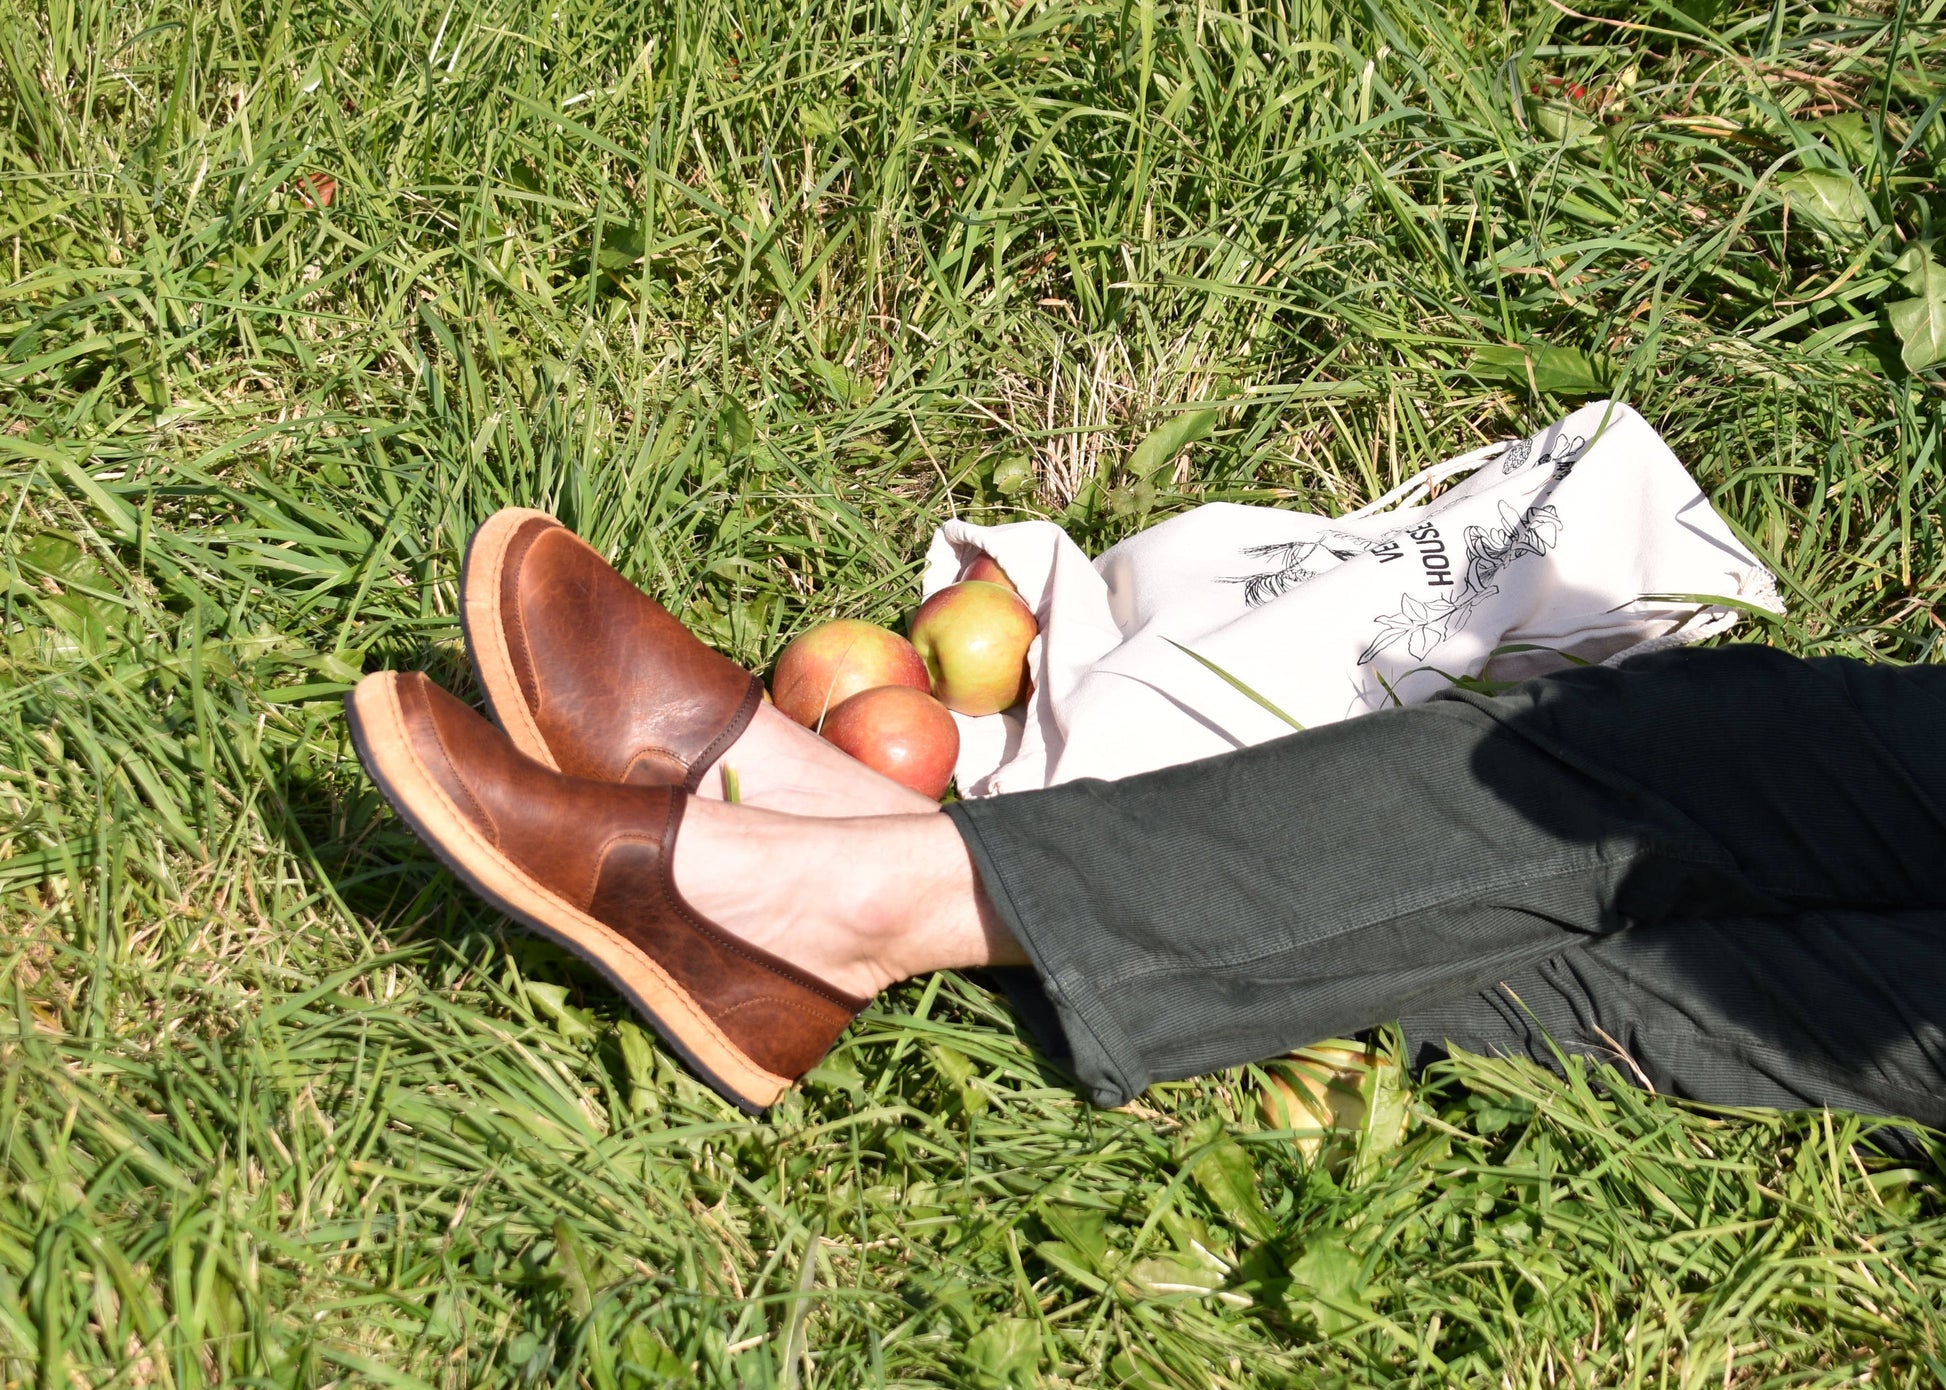 Vermont House Shoes - Loafer - Tobacco Bison on model outdoors